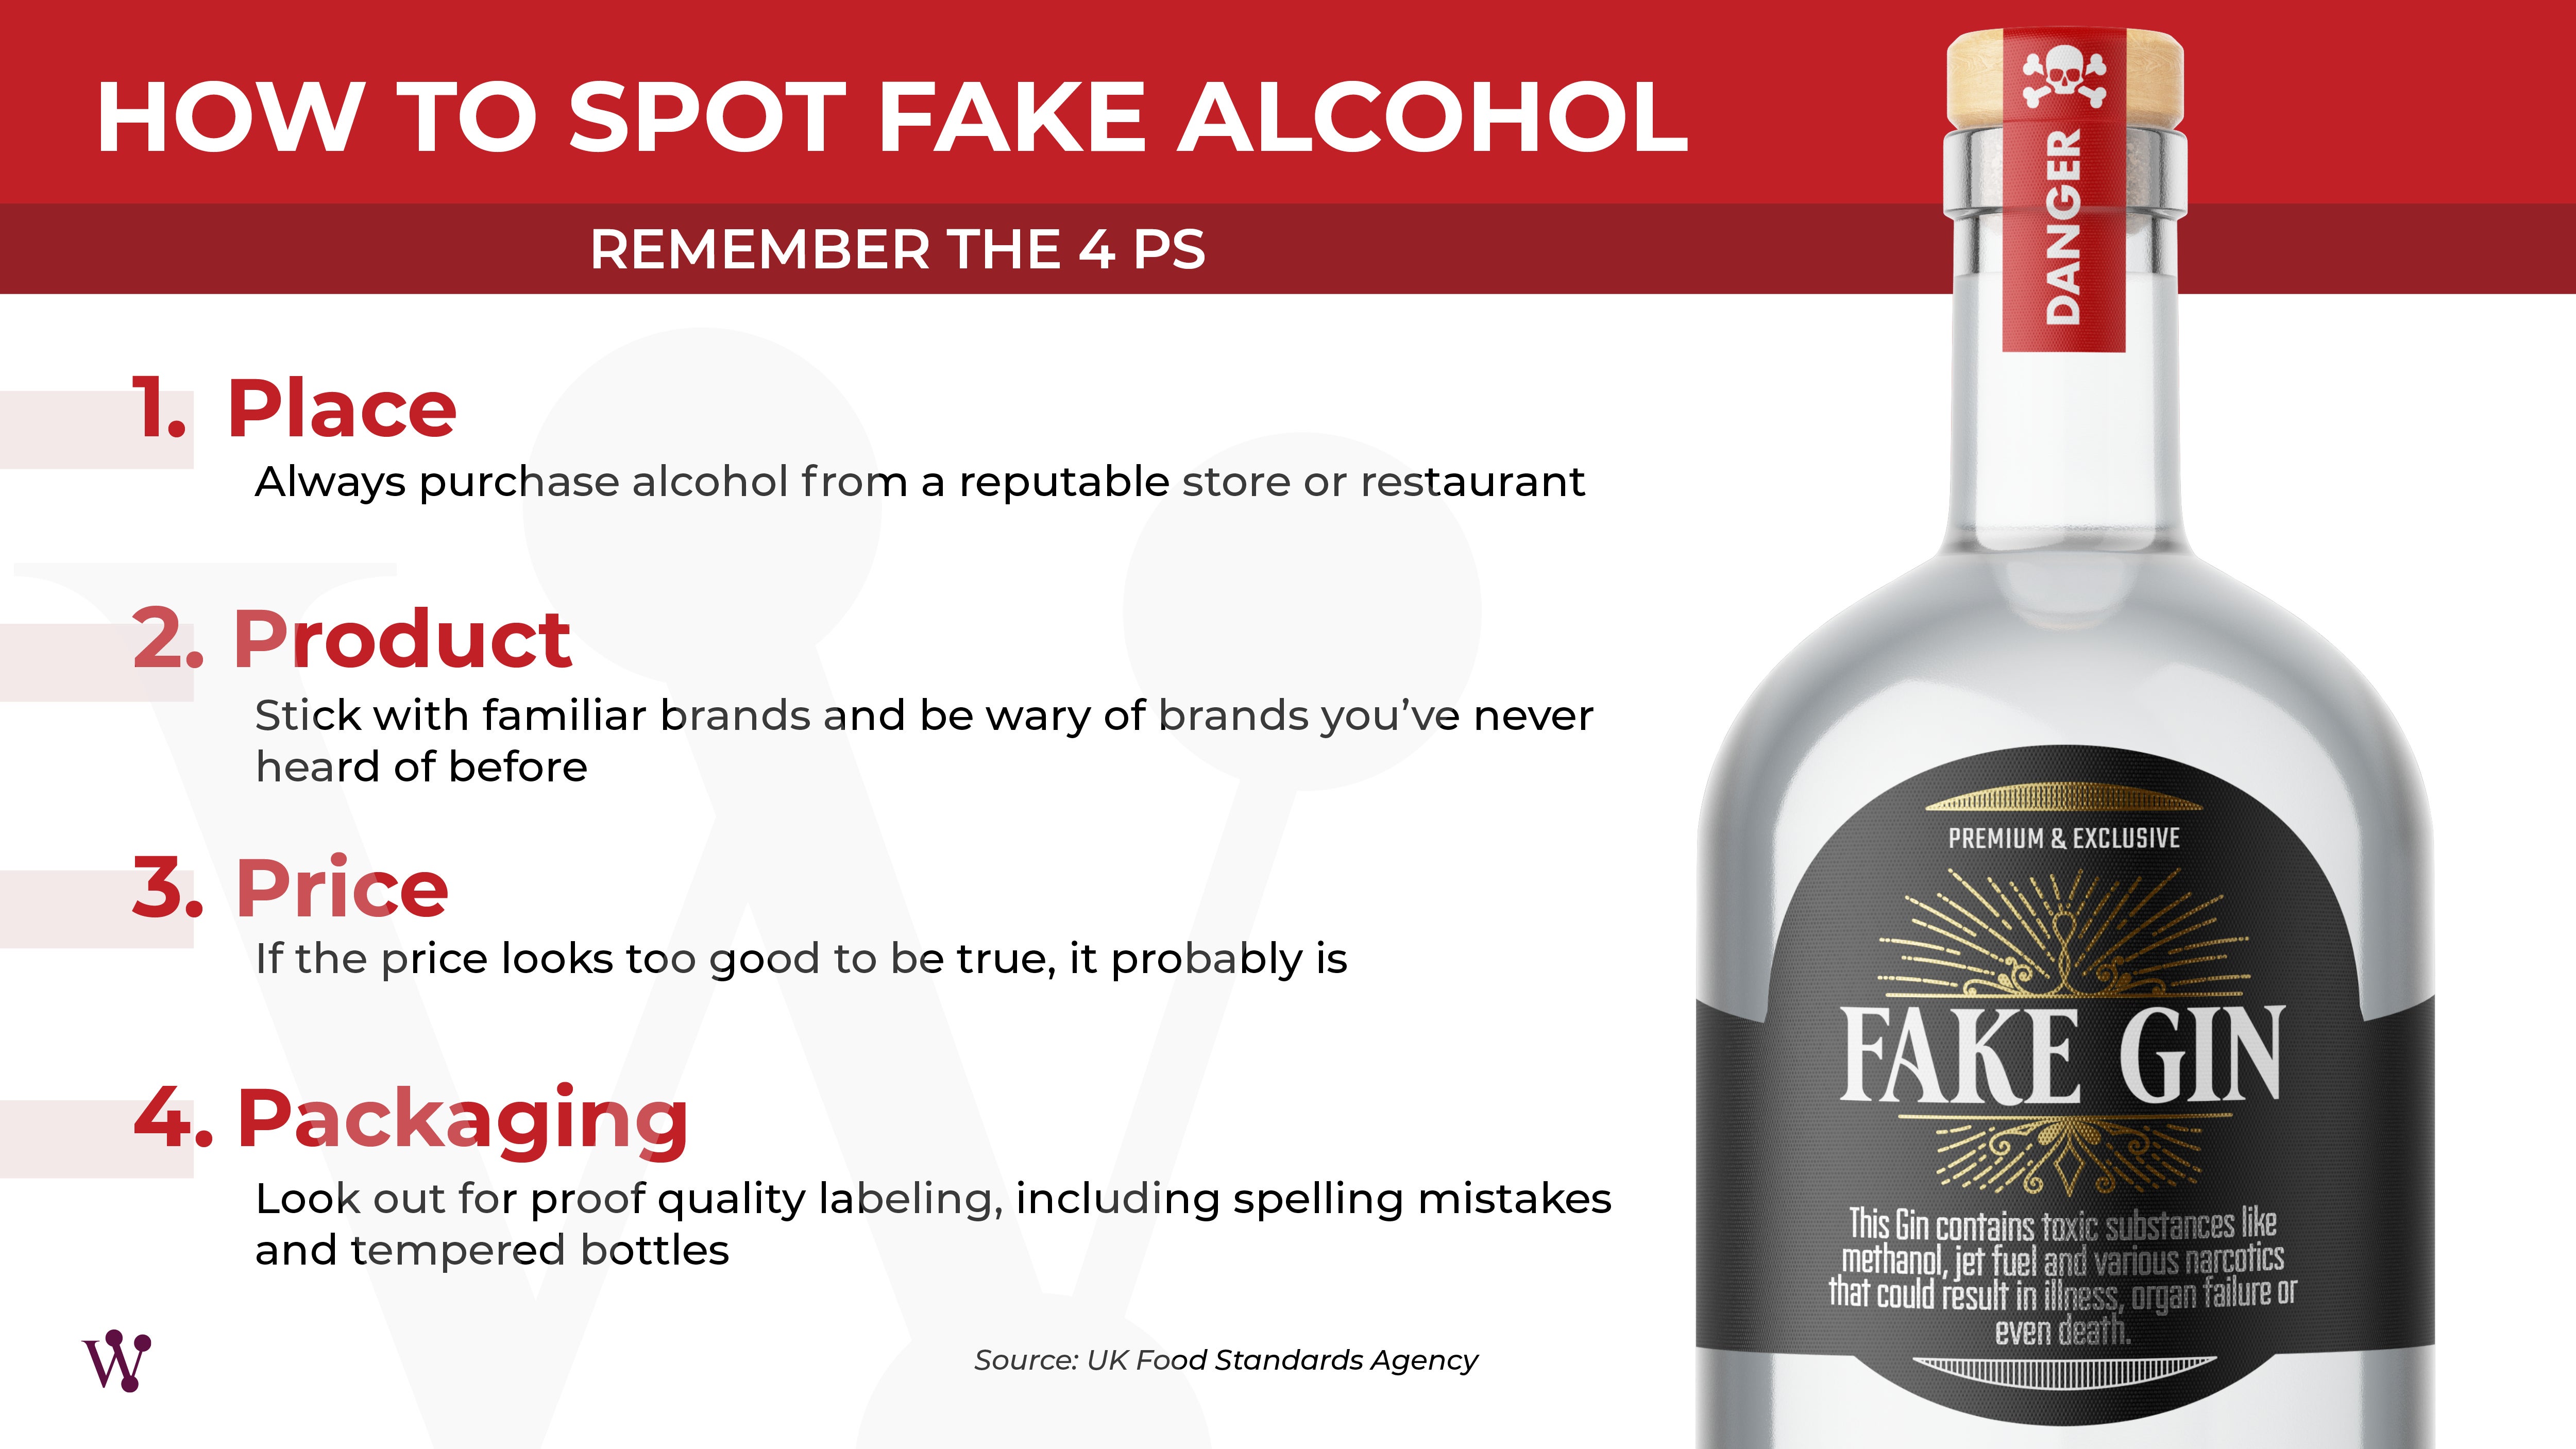 Use the 4 P's to Spot Fake Alcohol Abroad